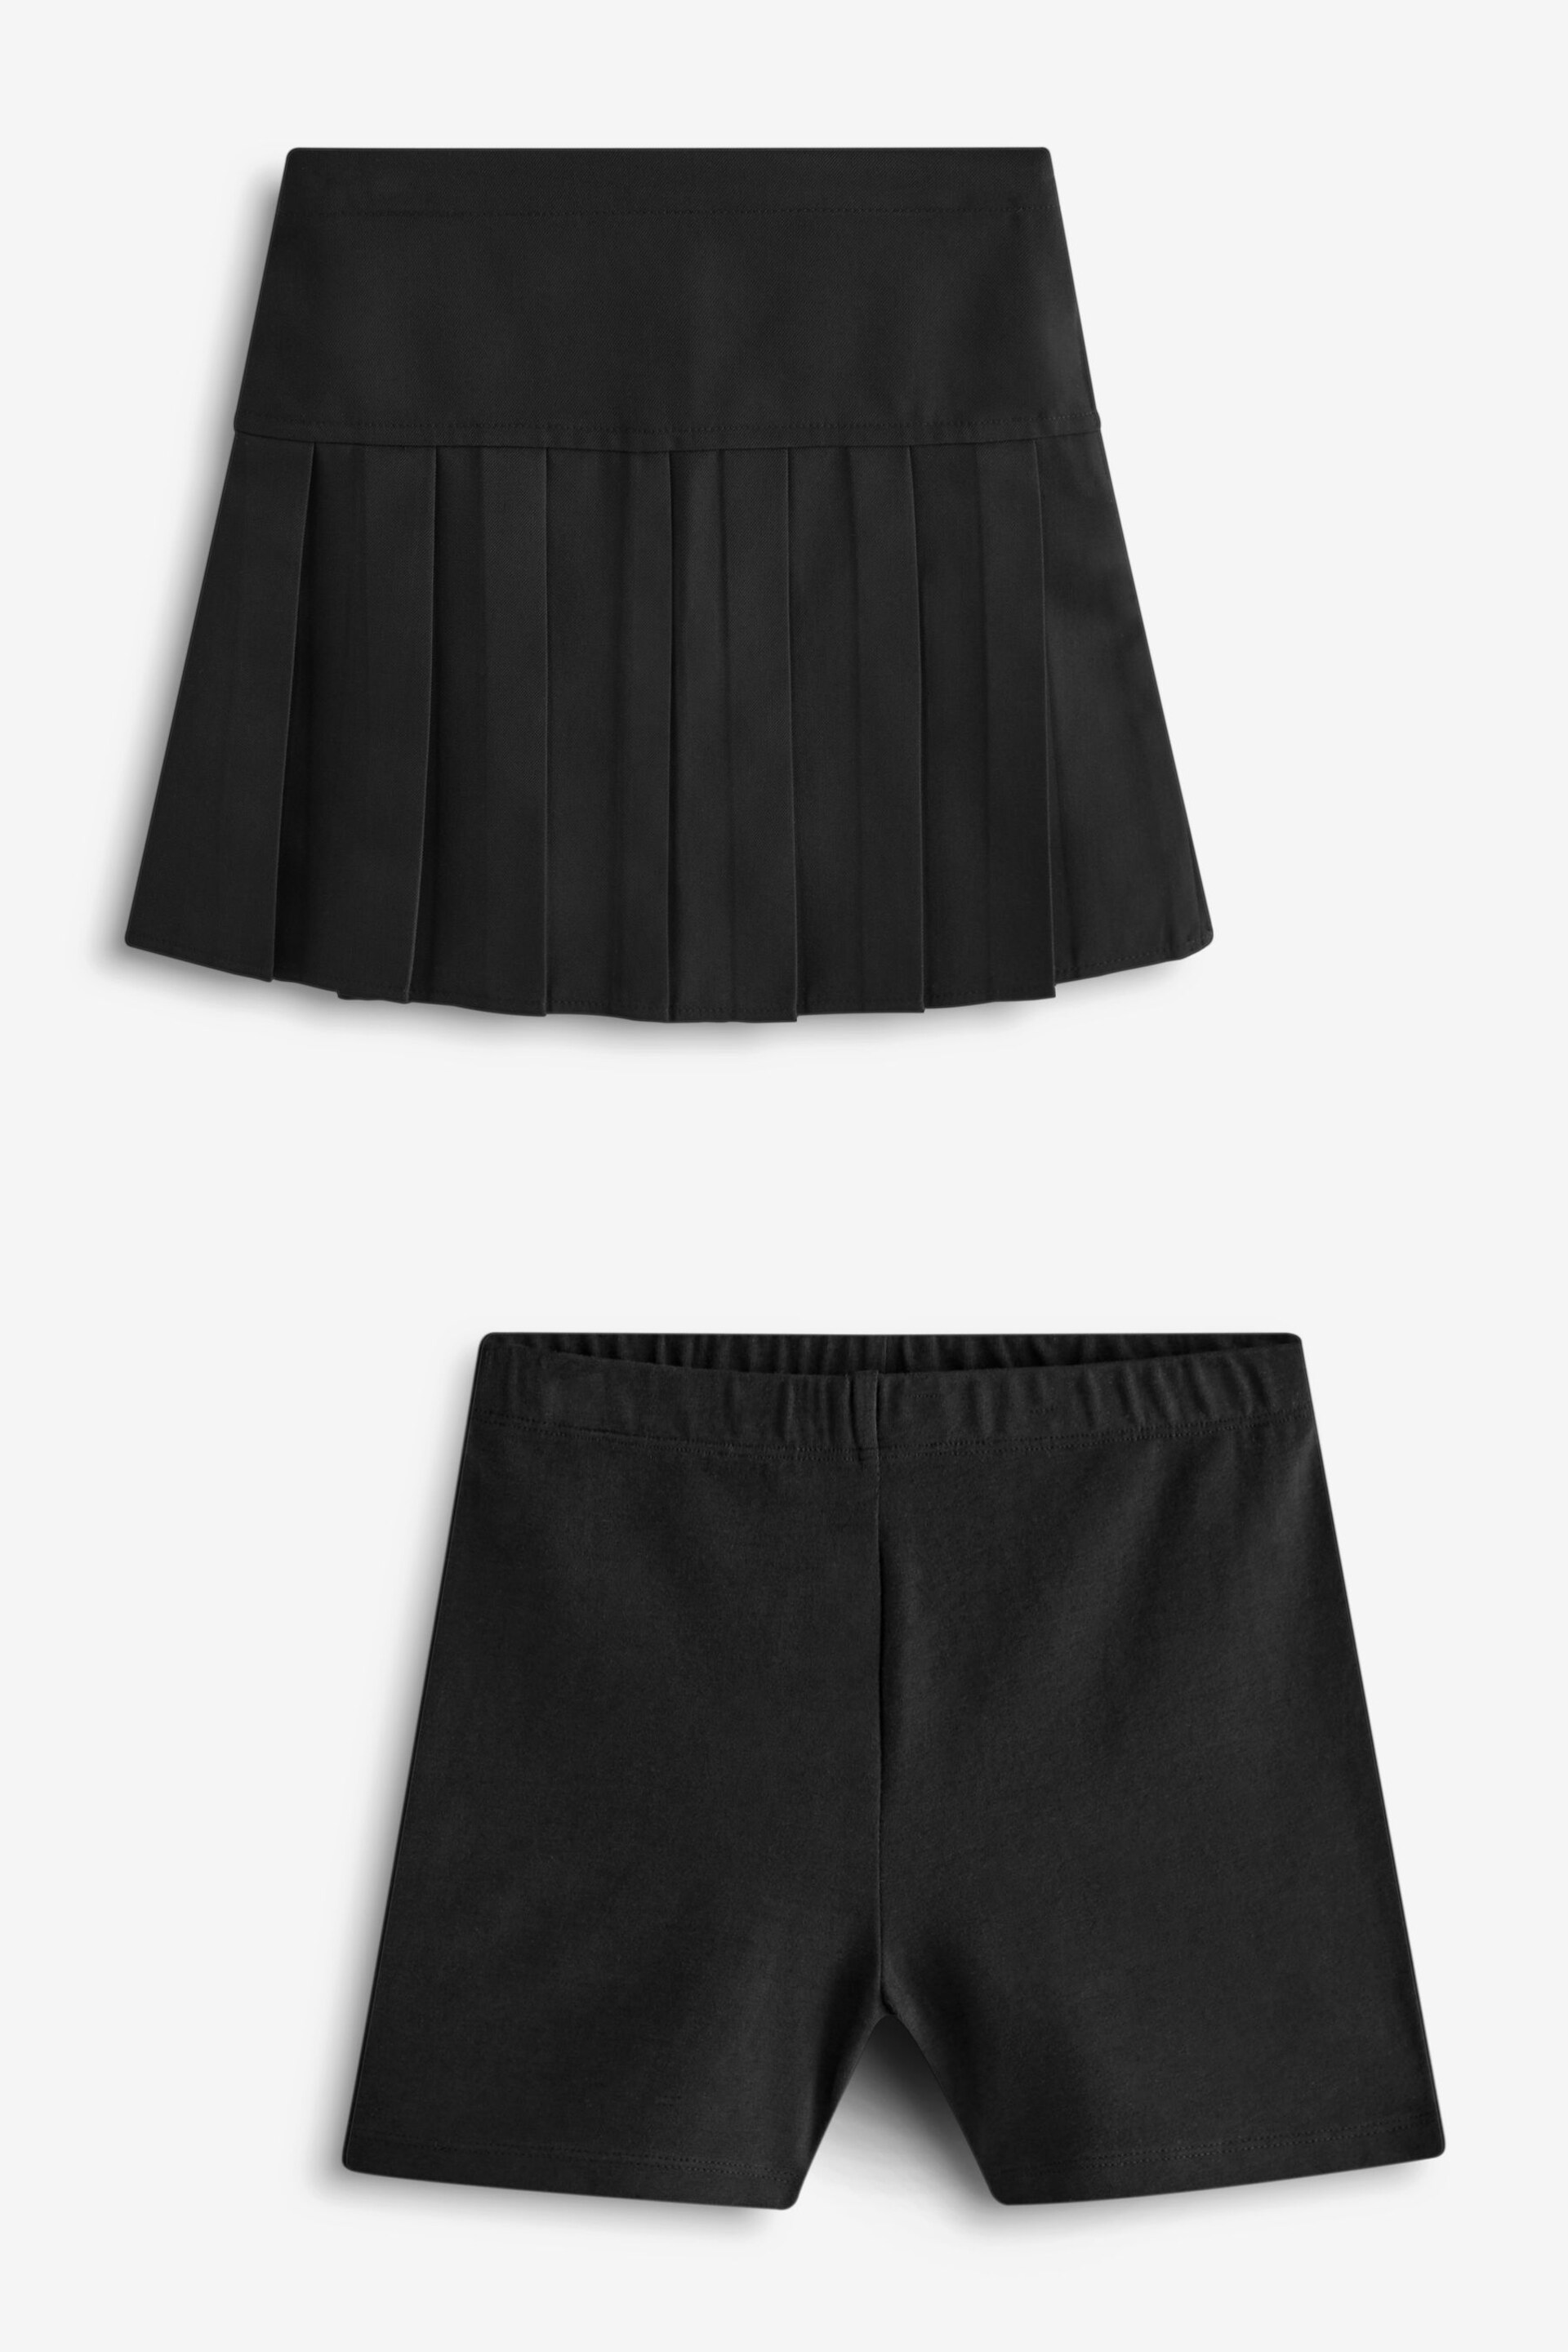 Black Pleat Skirt And Cycle Shorts Set (3-17yrs) - Image 5 of 9